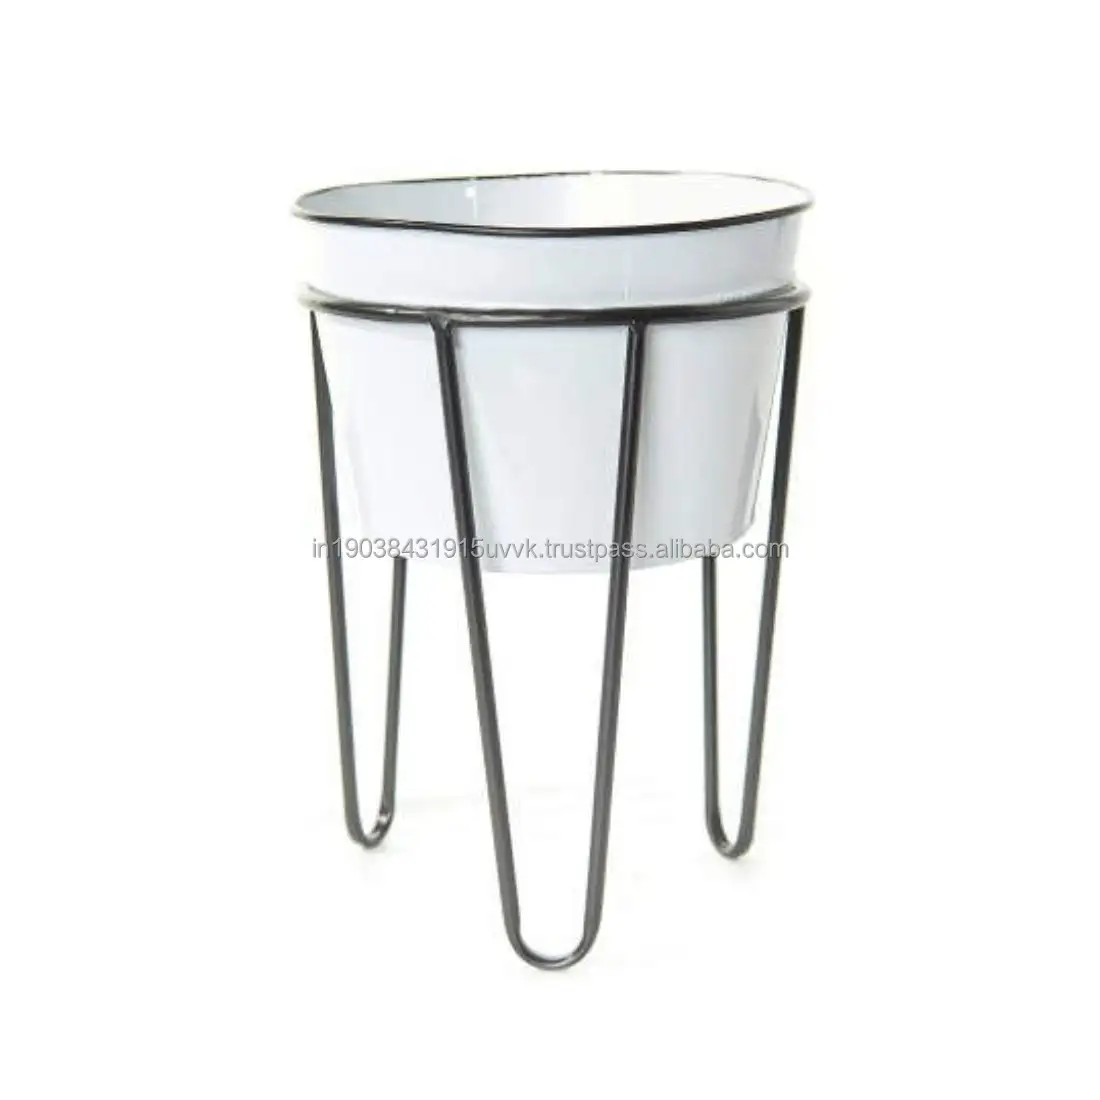 White Coated Excellent Iron Pot Small Bucket For Green Plants Indoor Home Garden Accessories Metal Planter With Stand Home Decor